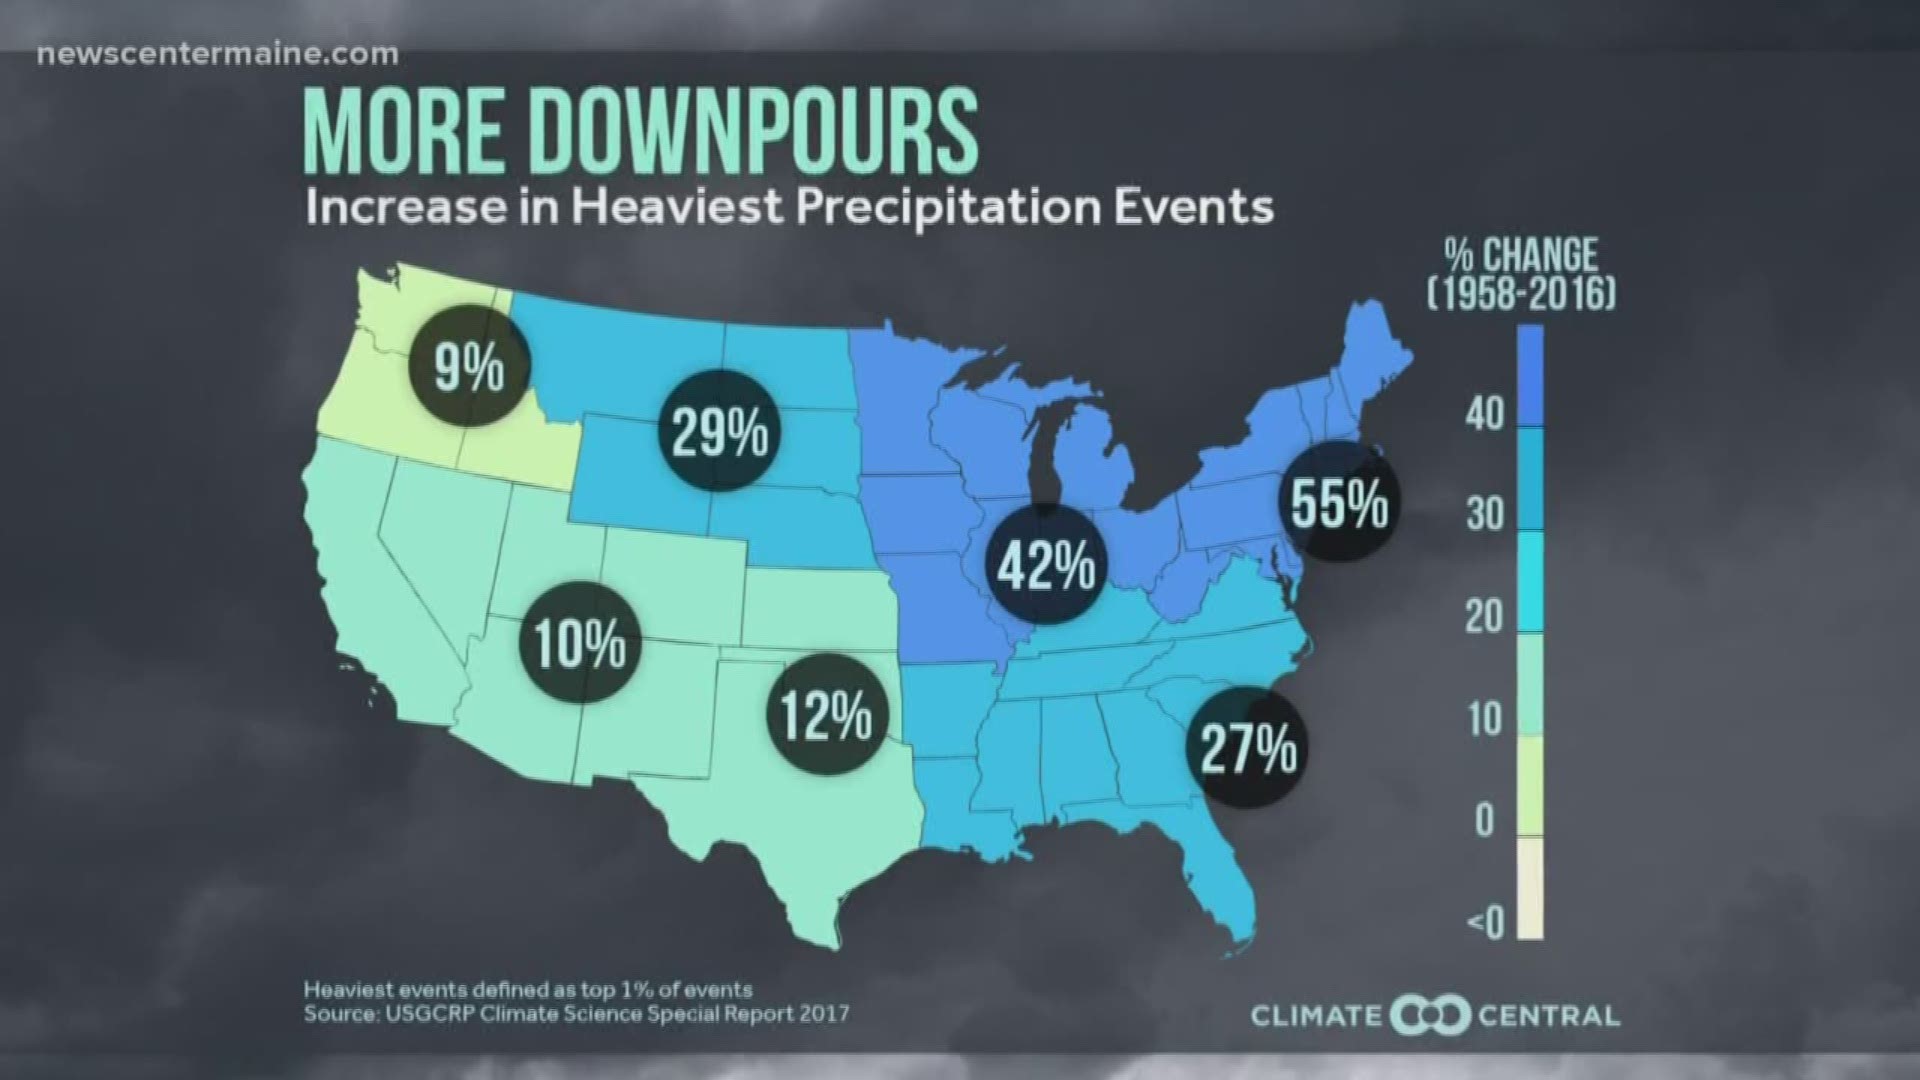 Ryan Breton concludes his Climate Change series with a closer look at rainfall trends.